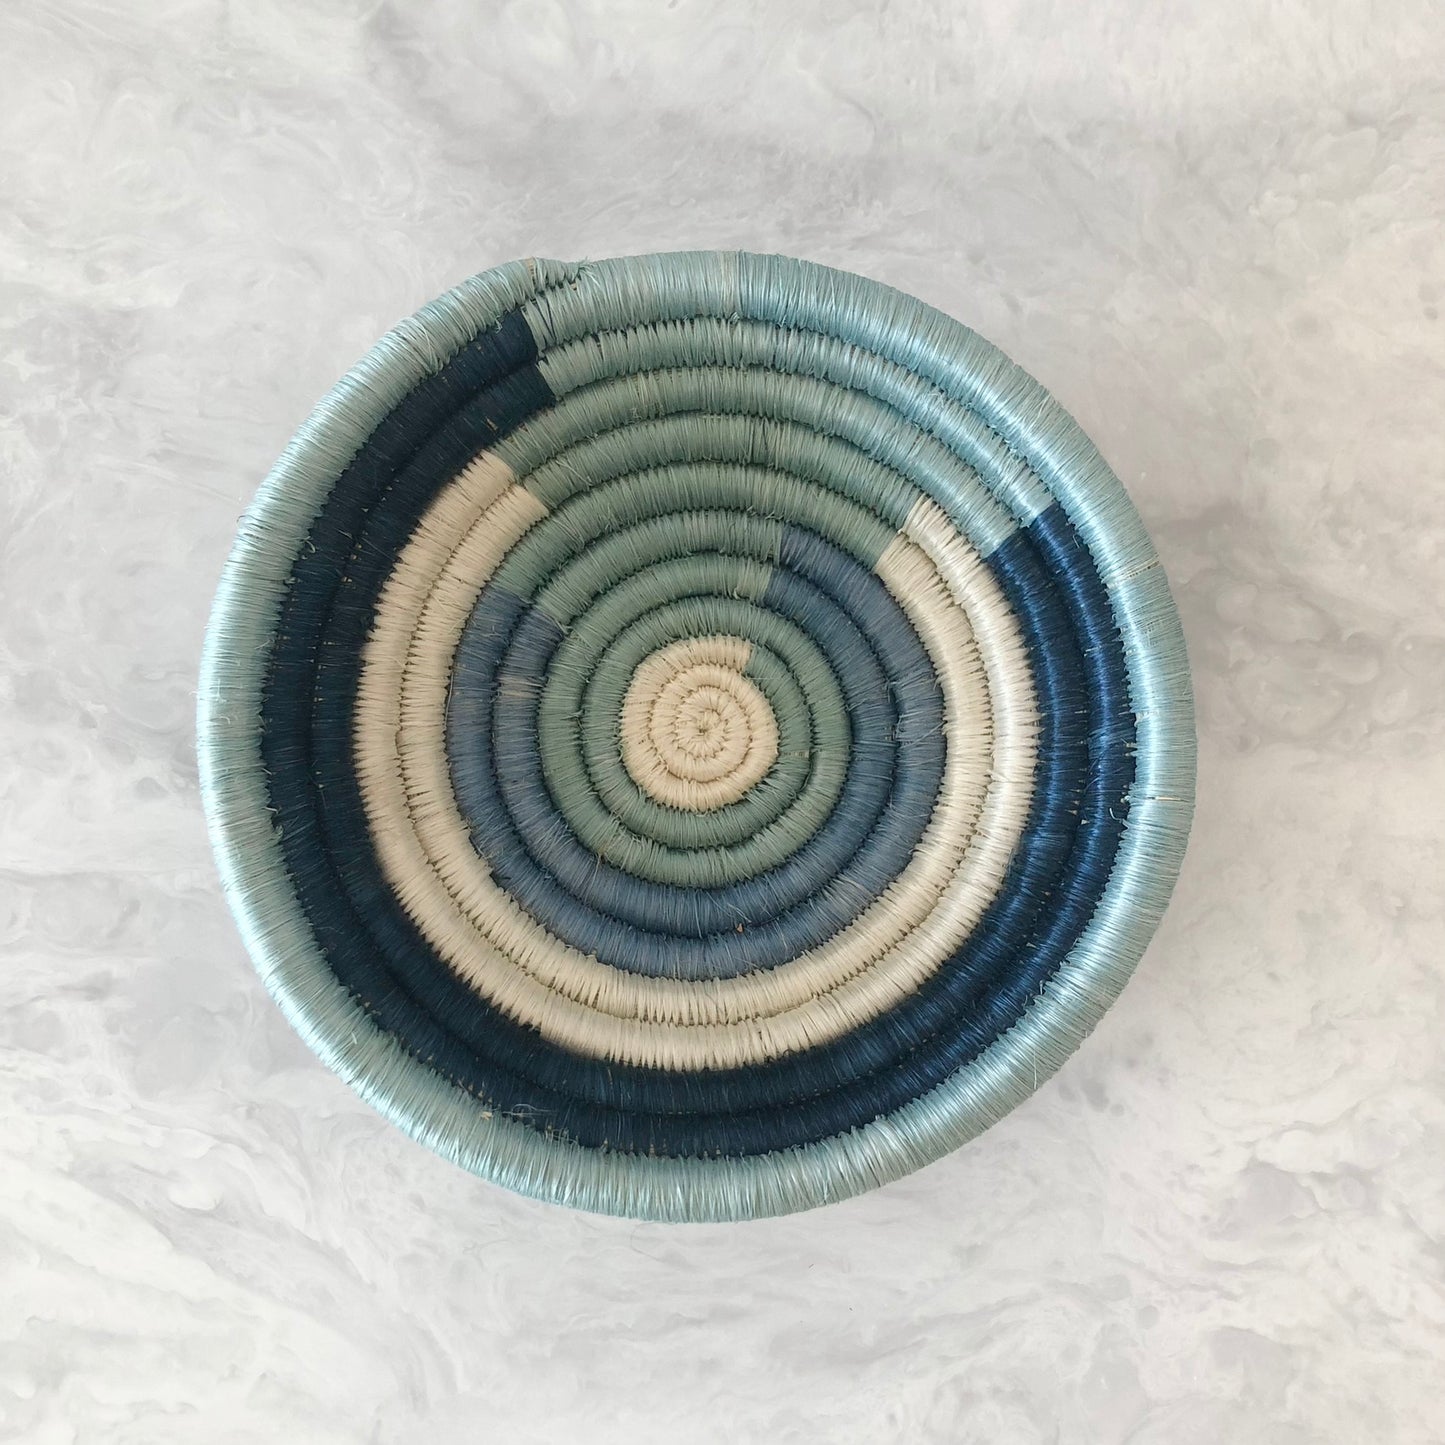 Synthesis Woven Bowl in Momentum - 6"